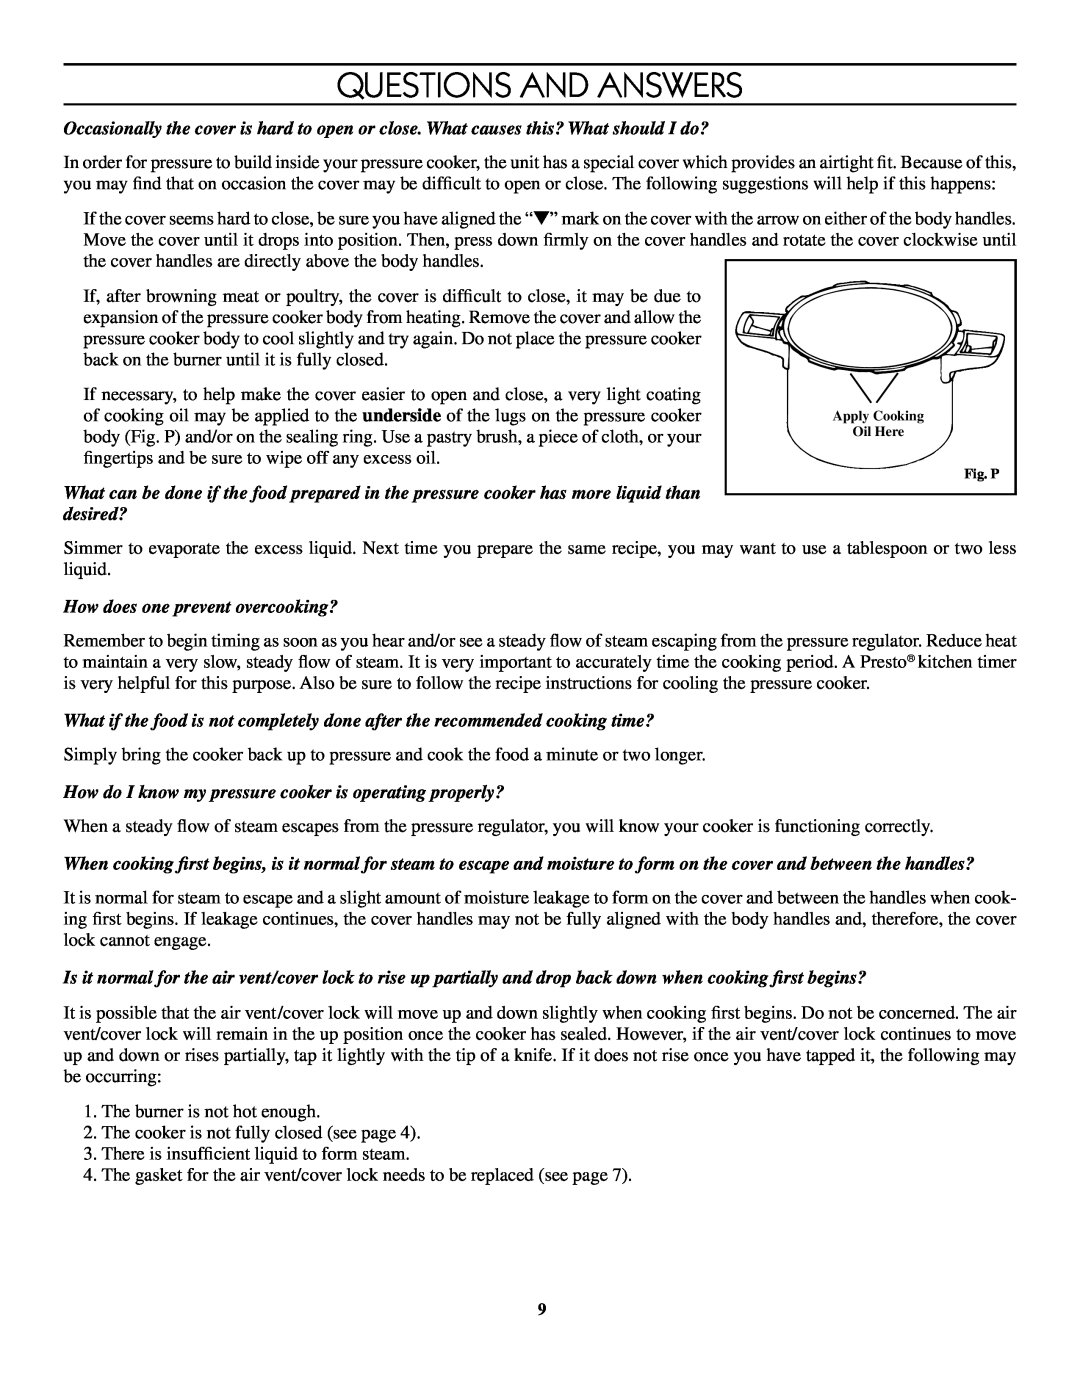 Presto 8-Quart Stainless Steel Pressure Cooker warranty Questions AND Answers 